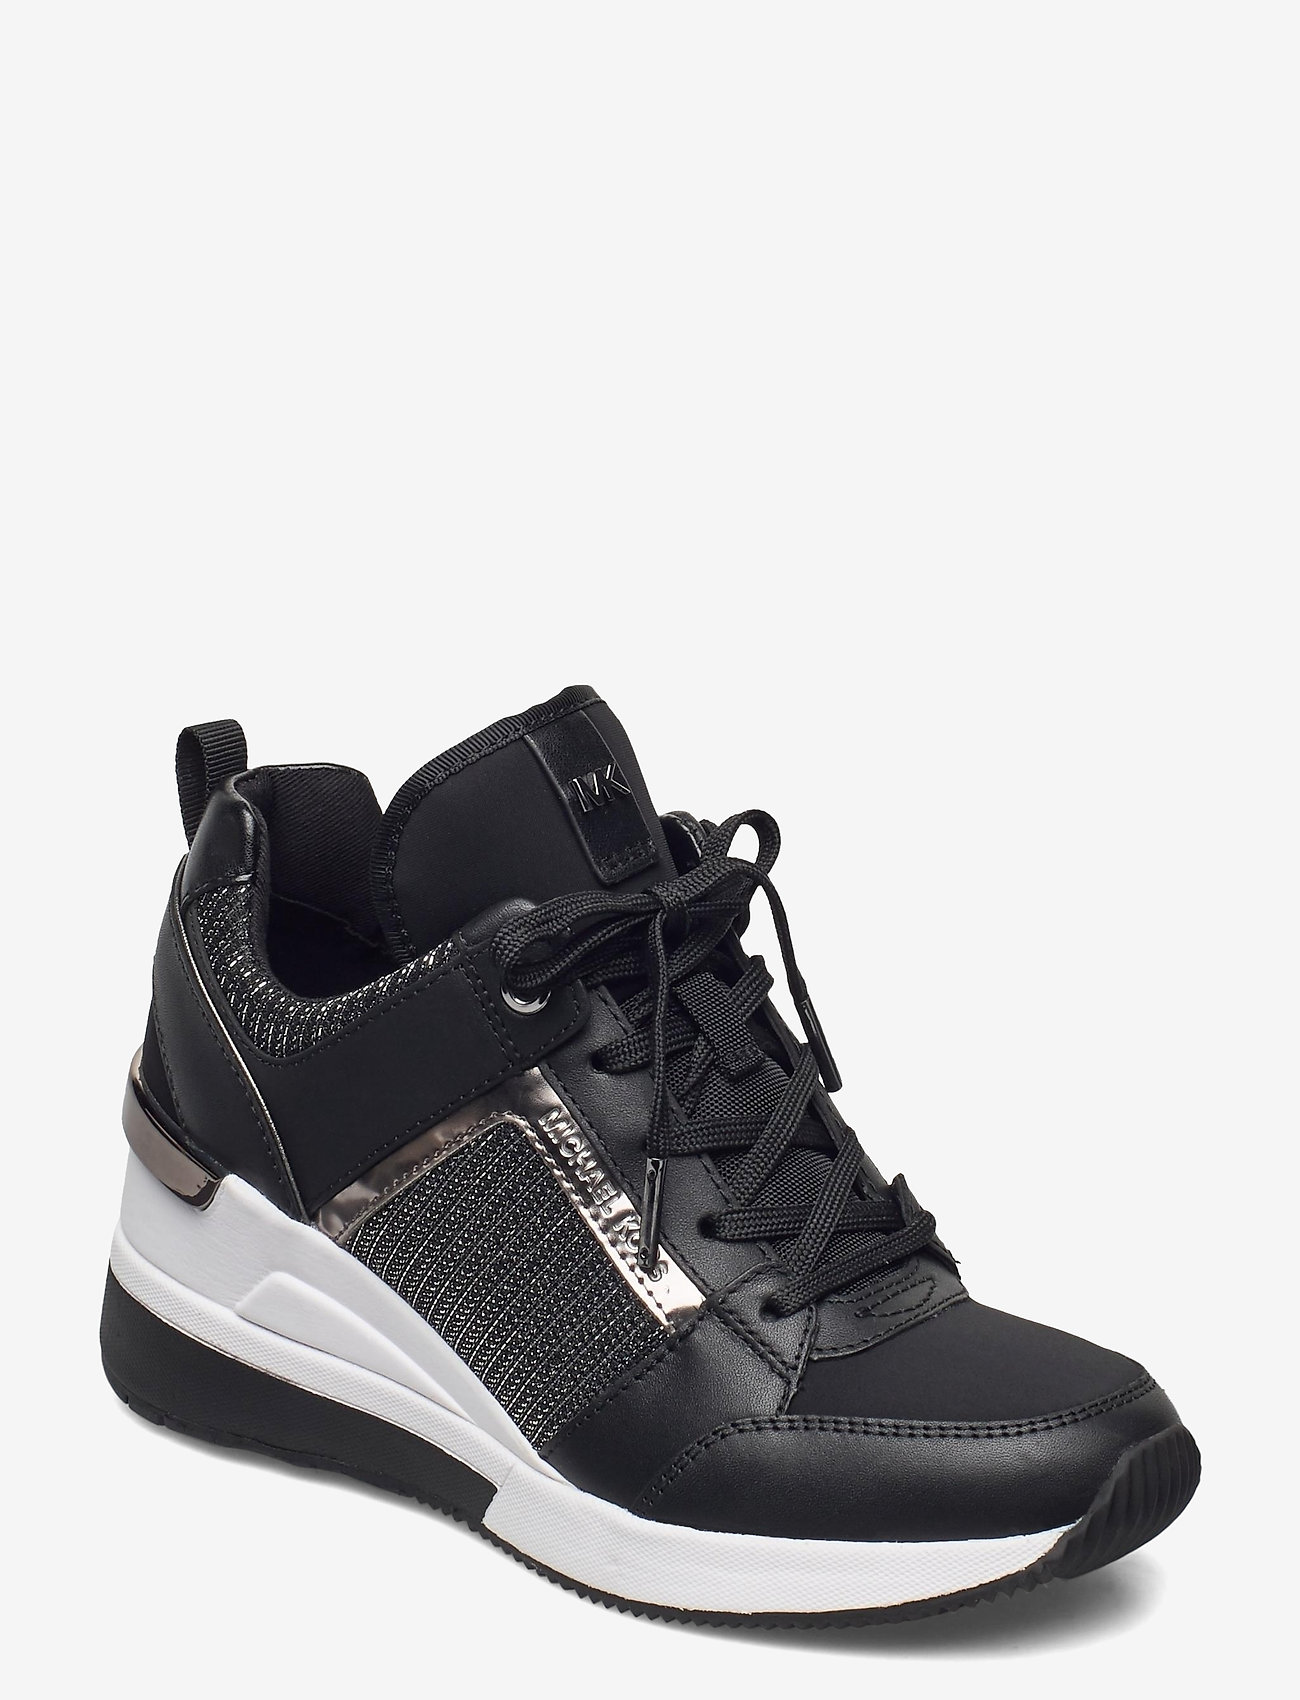 michael kors trainers black and white